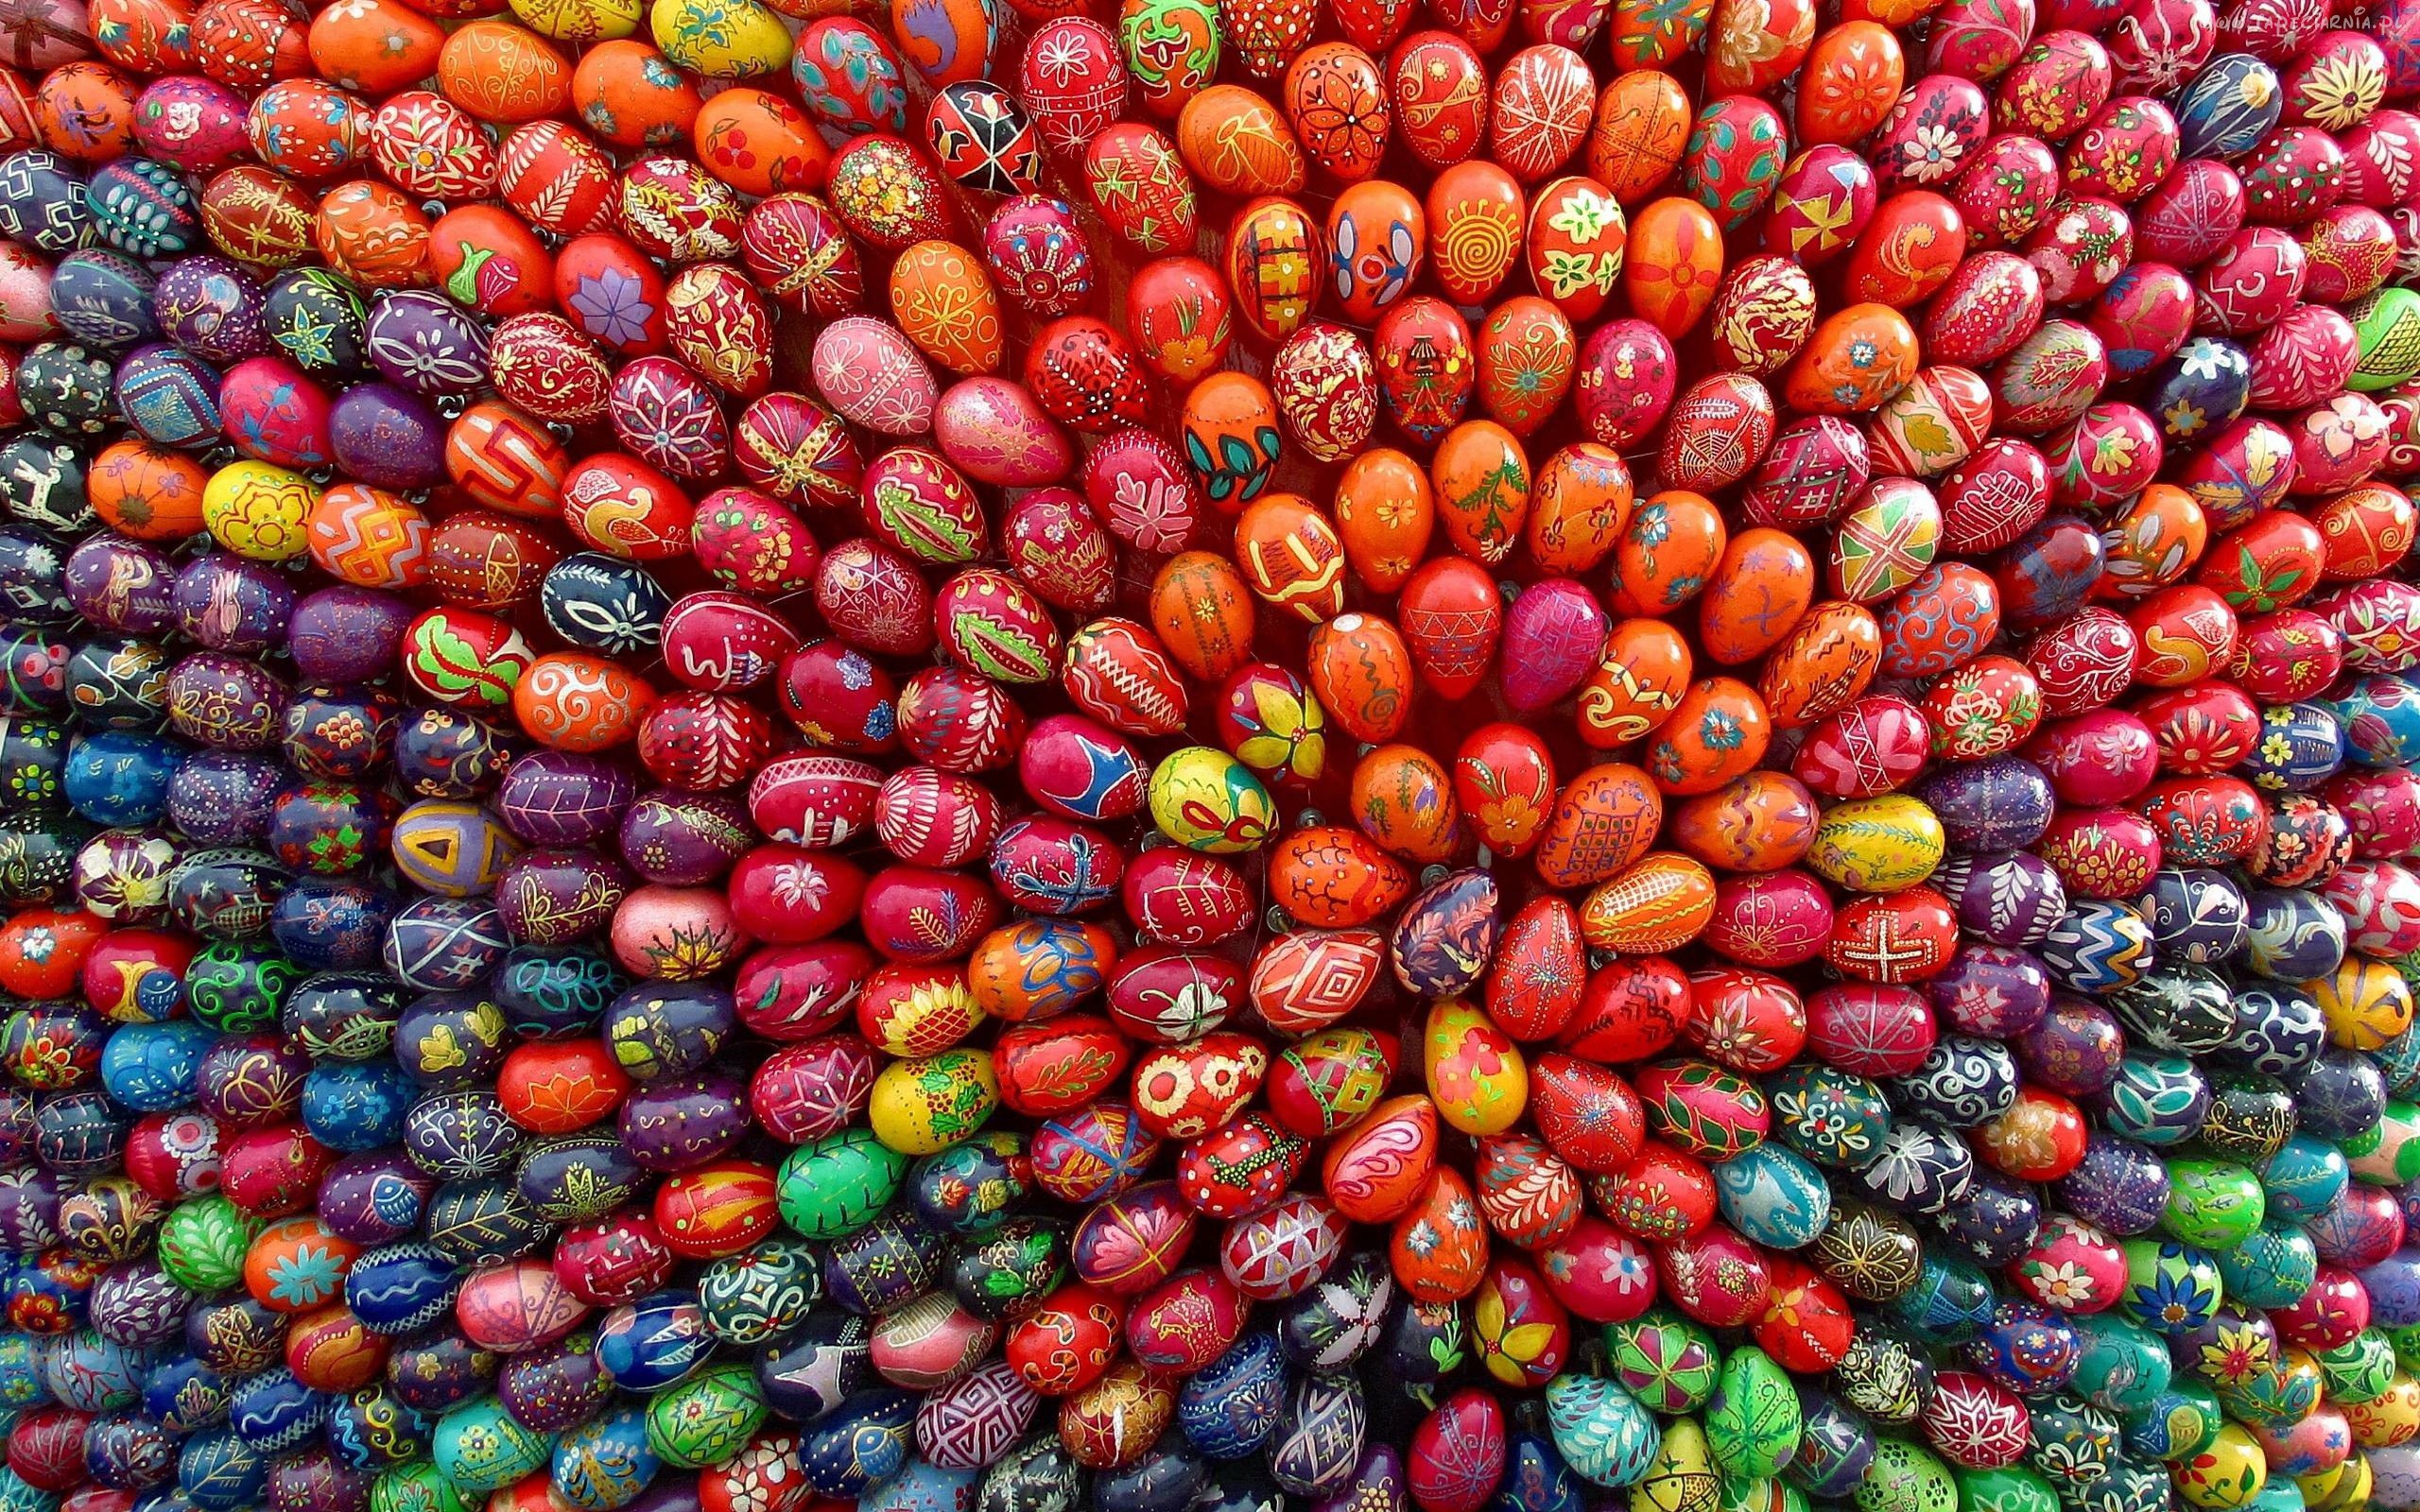 Free download Easter Eggs Photo Wallpaper High Definition High Quality [2560x1600] for your Desktop, Mobile & Tablet. Explore Easter Egg Desktop Wallpaper. Desktop Wallpaper Easter Image, 3D Easter Desktop Wallpaper